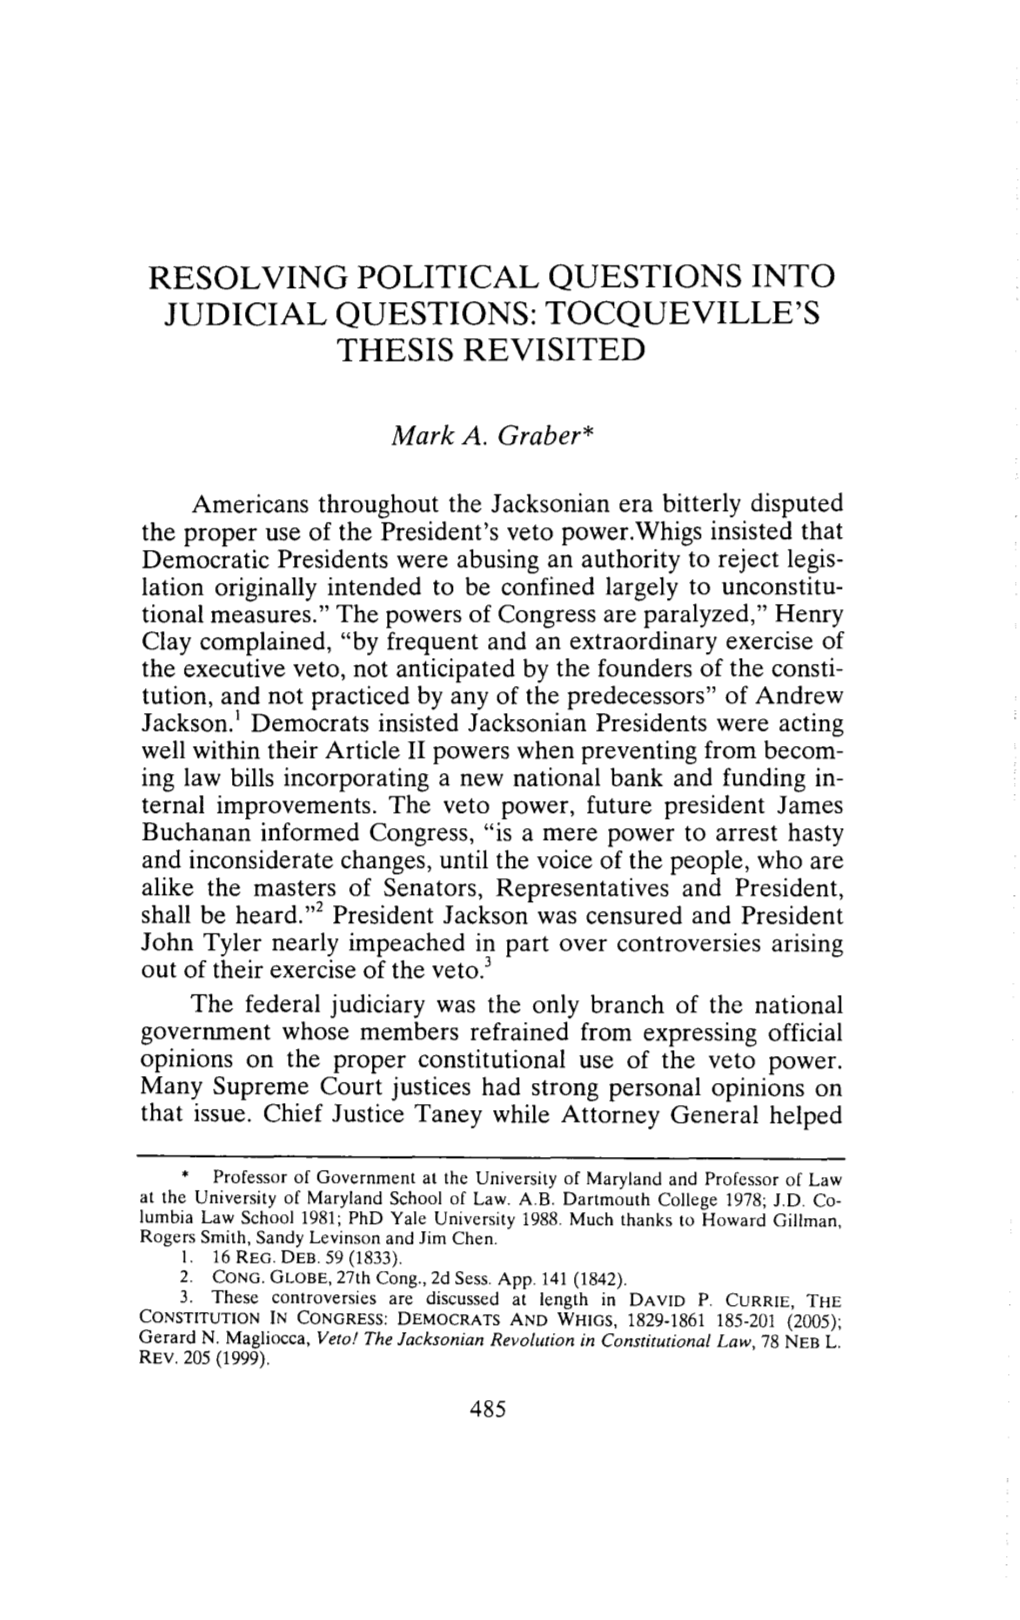 Resolving Political Questions Into Judicial Questions: Tocqueville's Thesis Revisited